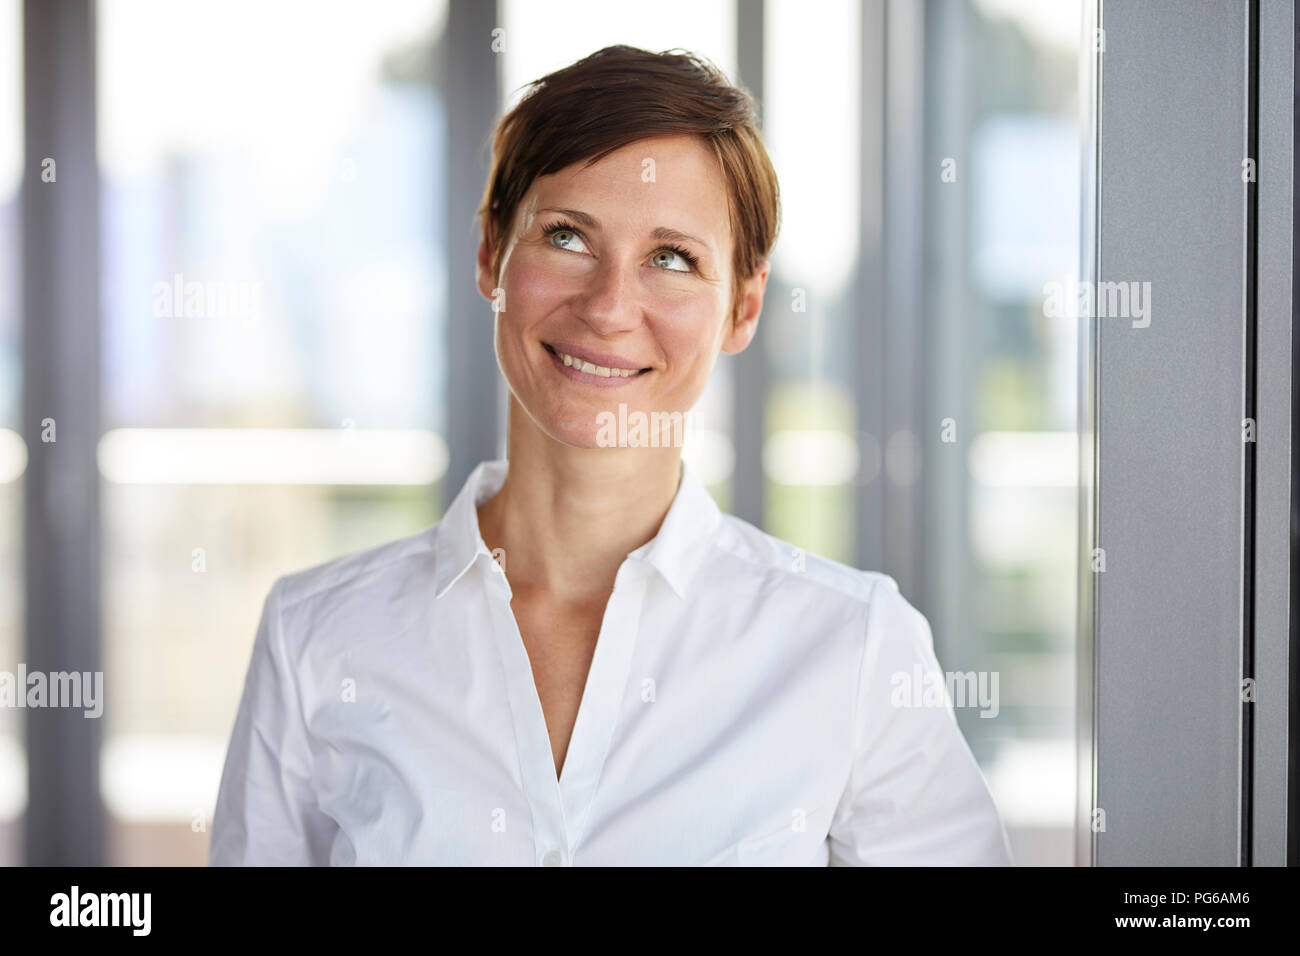 Portrait of smiling businesswoman in office looking up Stock Photo